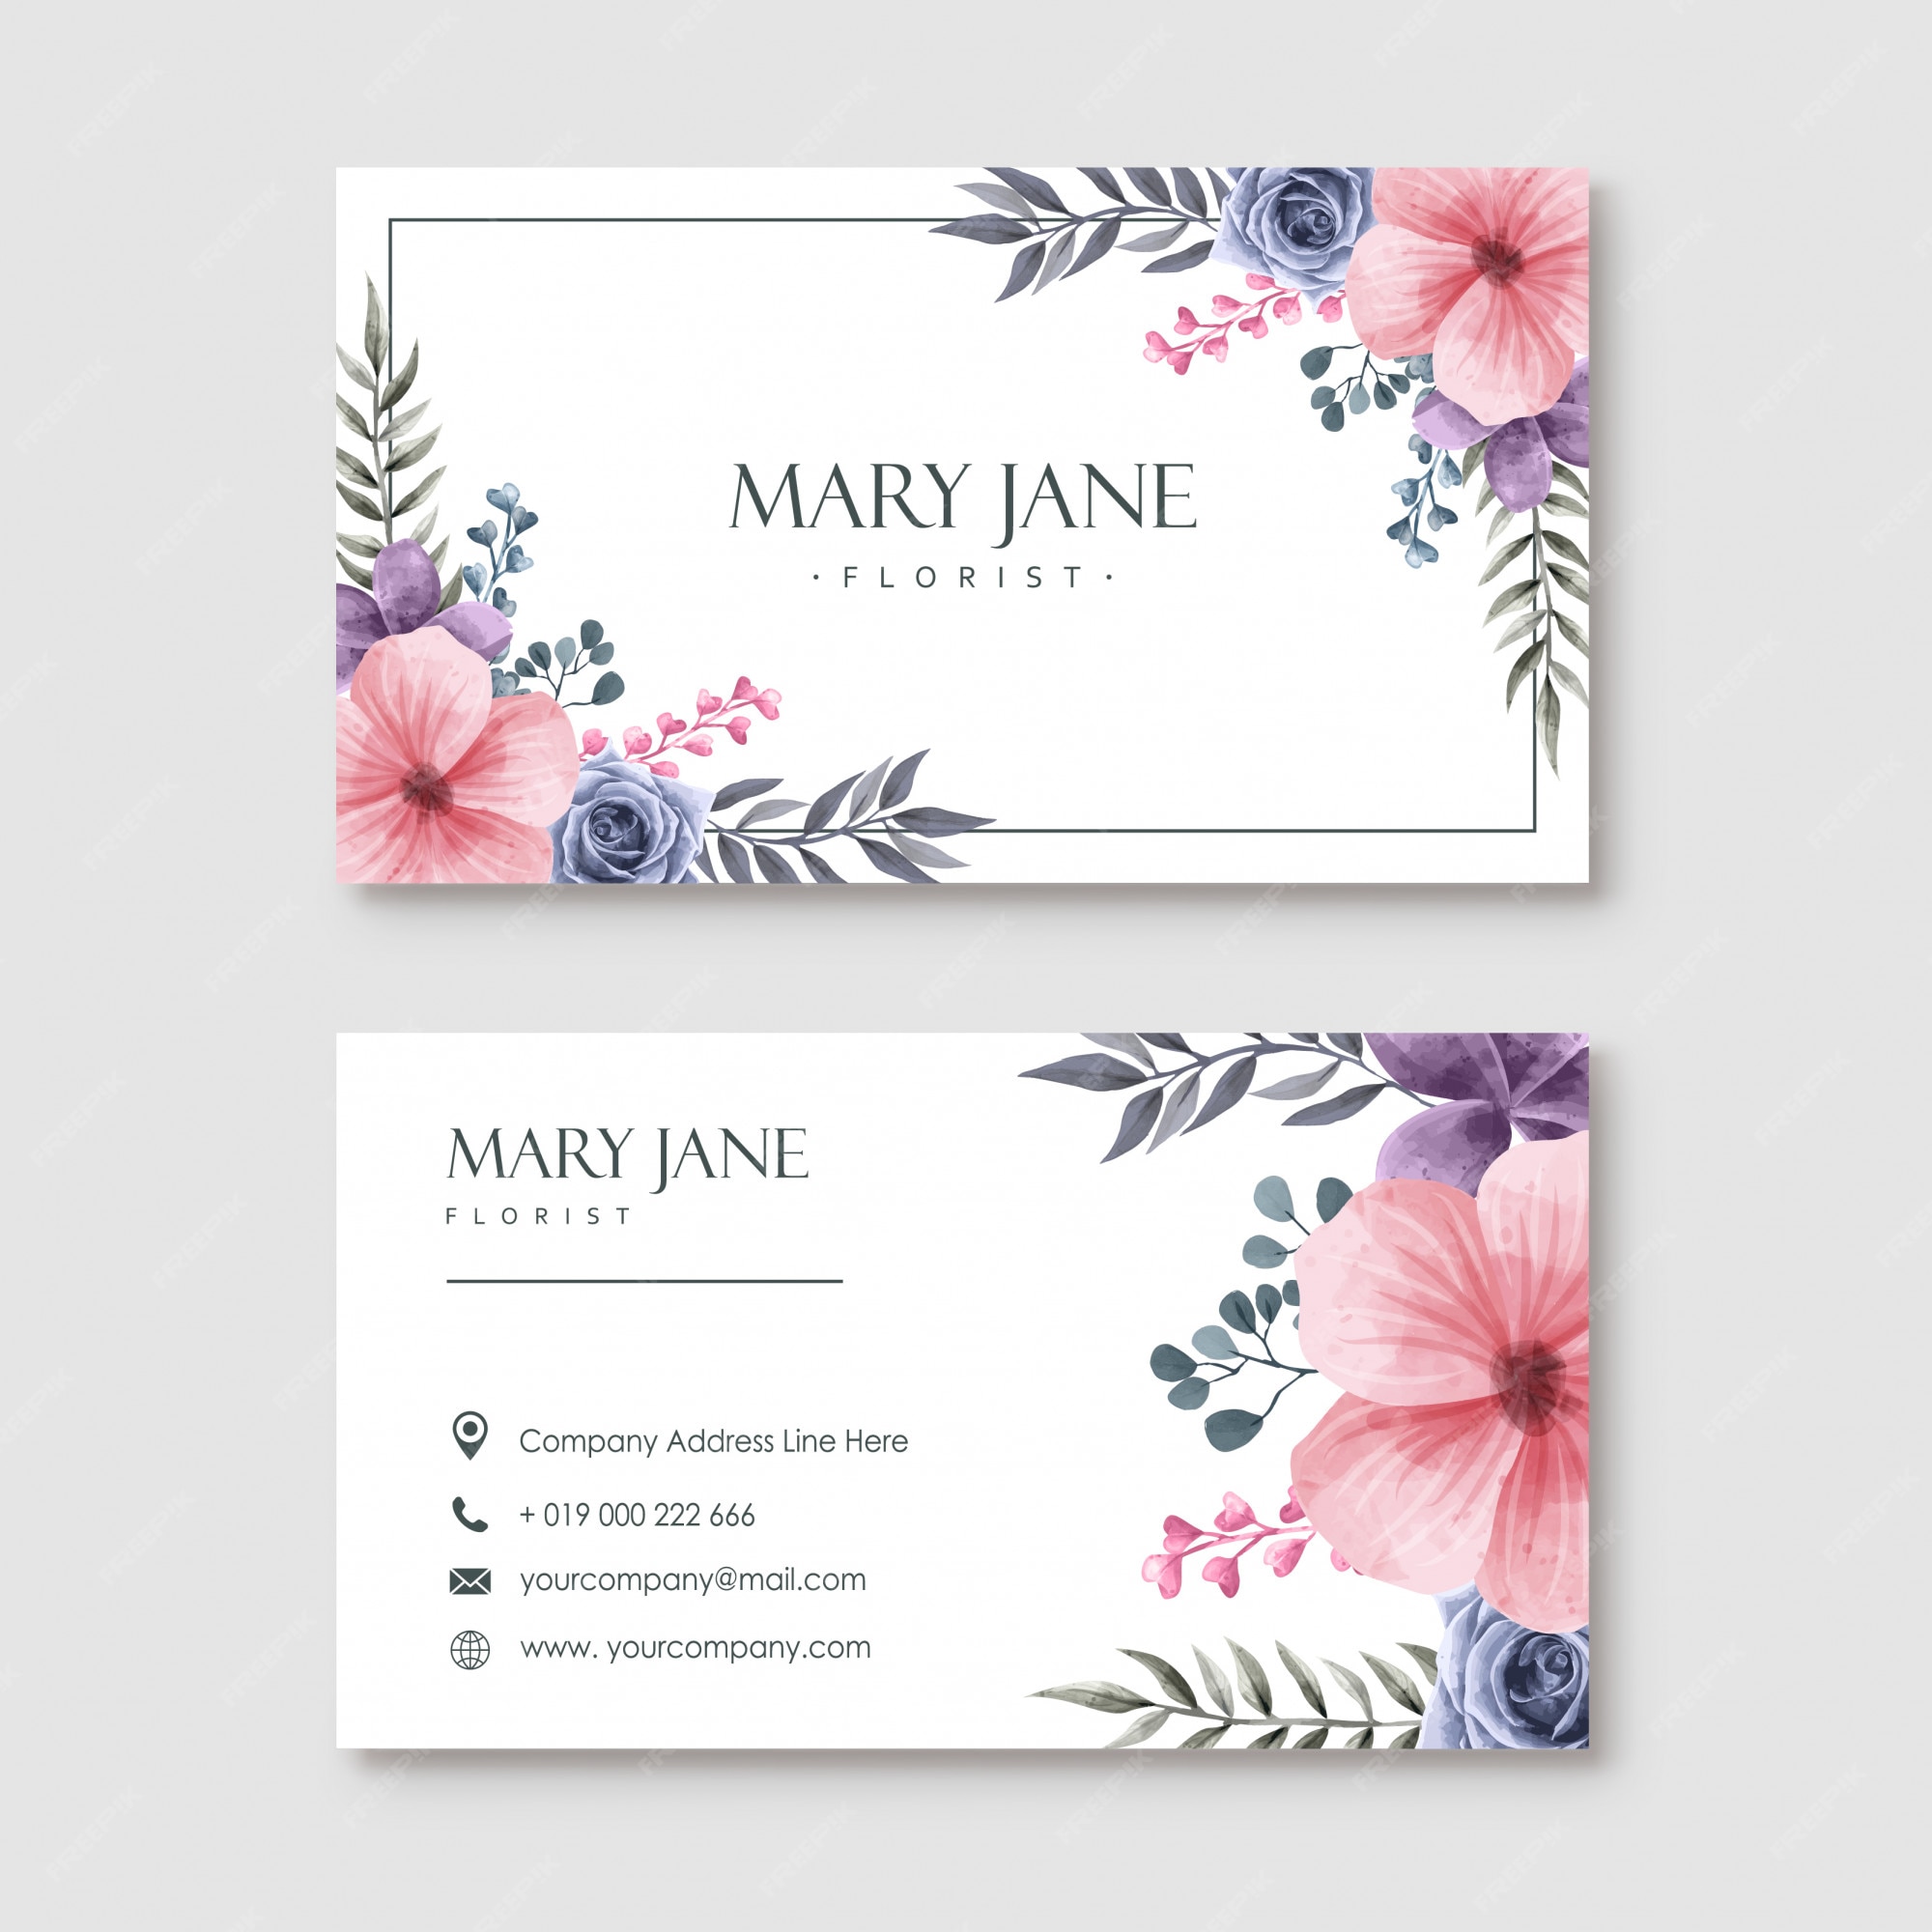 Premium Vector Florist Business Card Template With Watercolor Floral